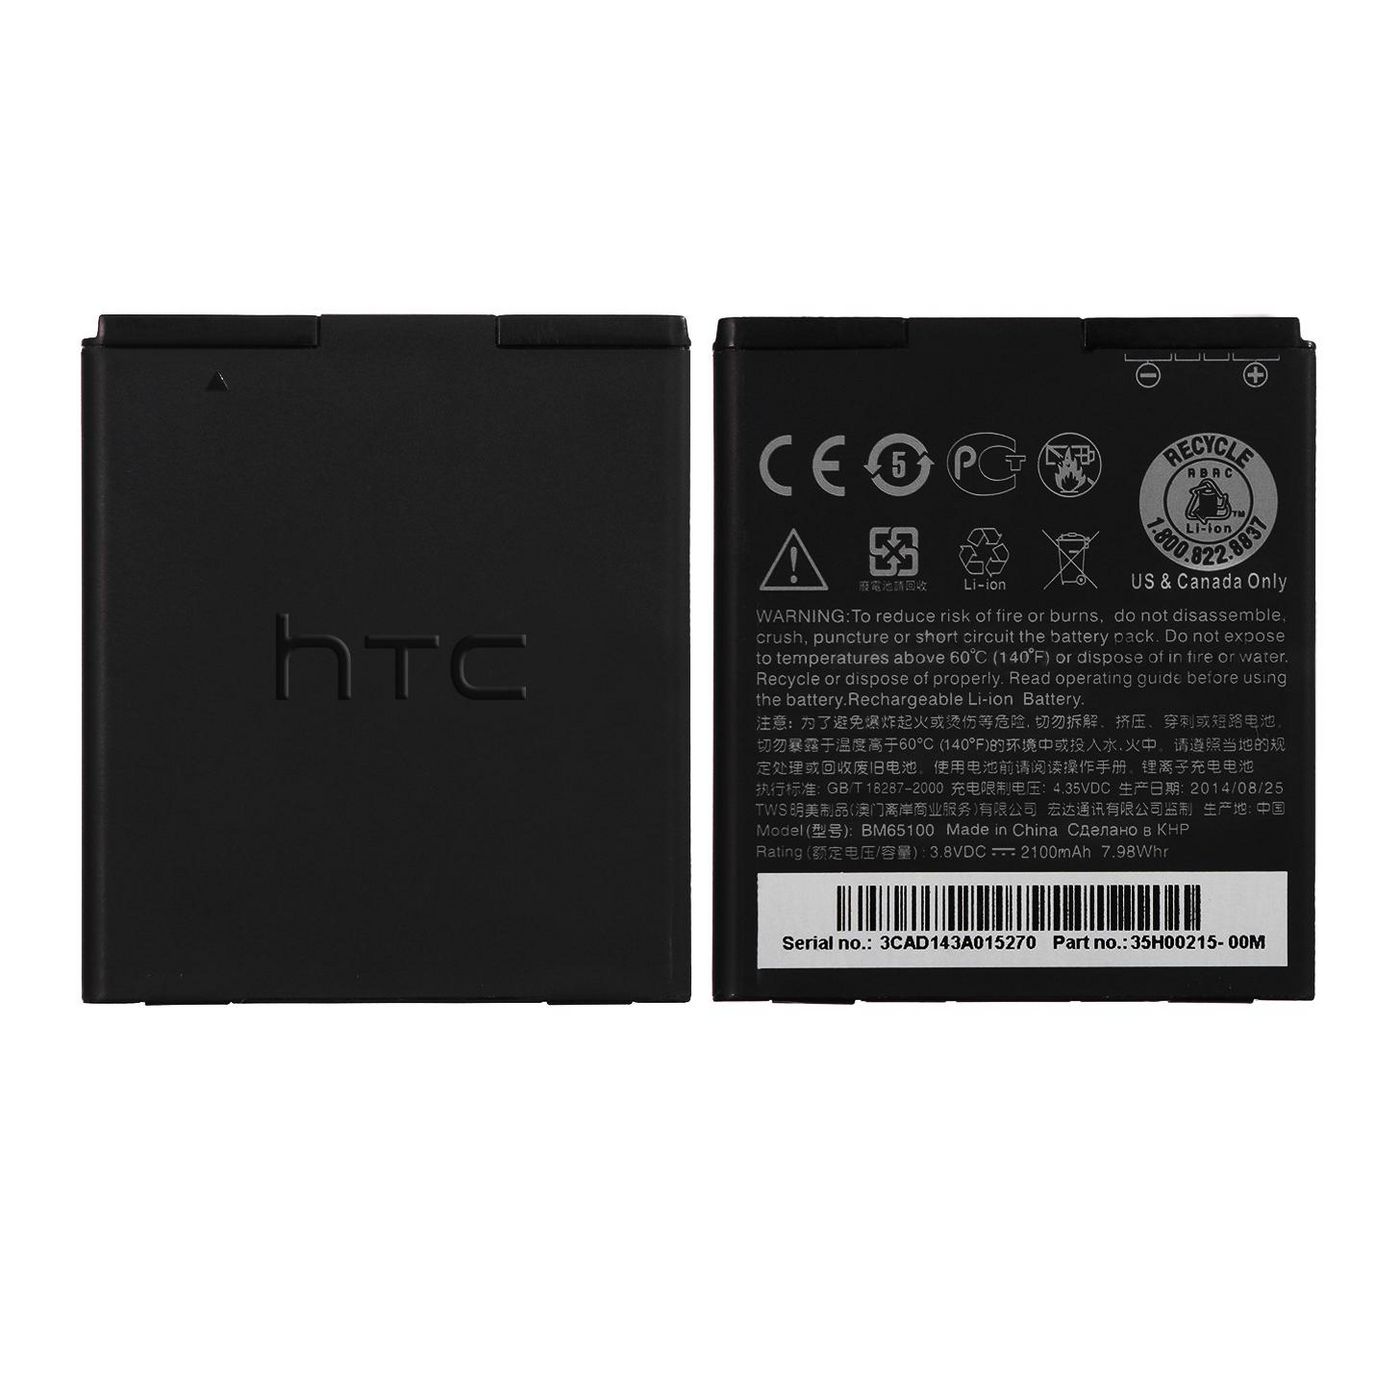 CoreParts MSPP2533 Battery for HTC Mobile 